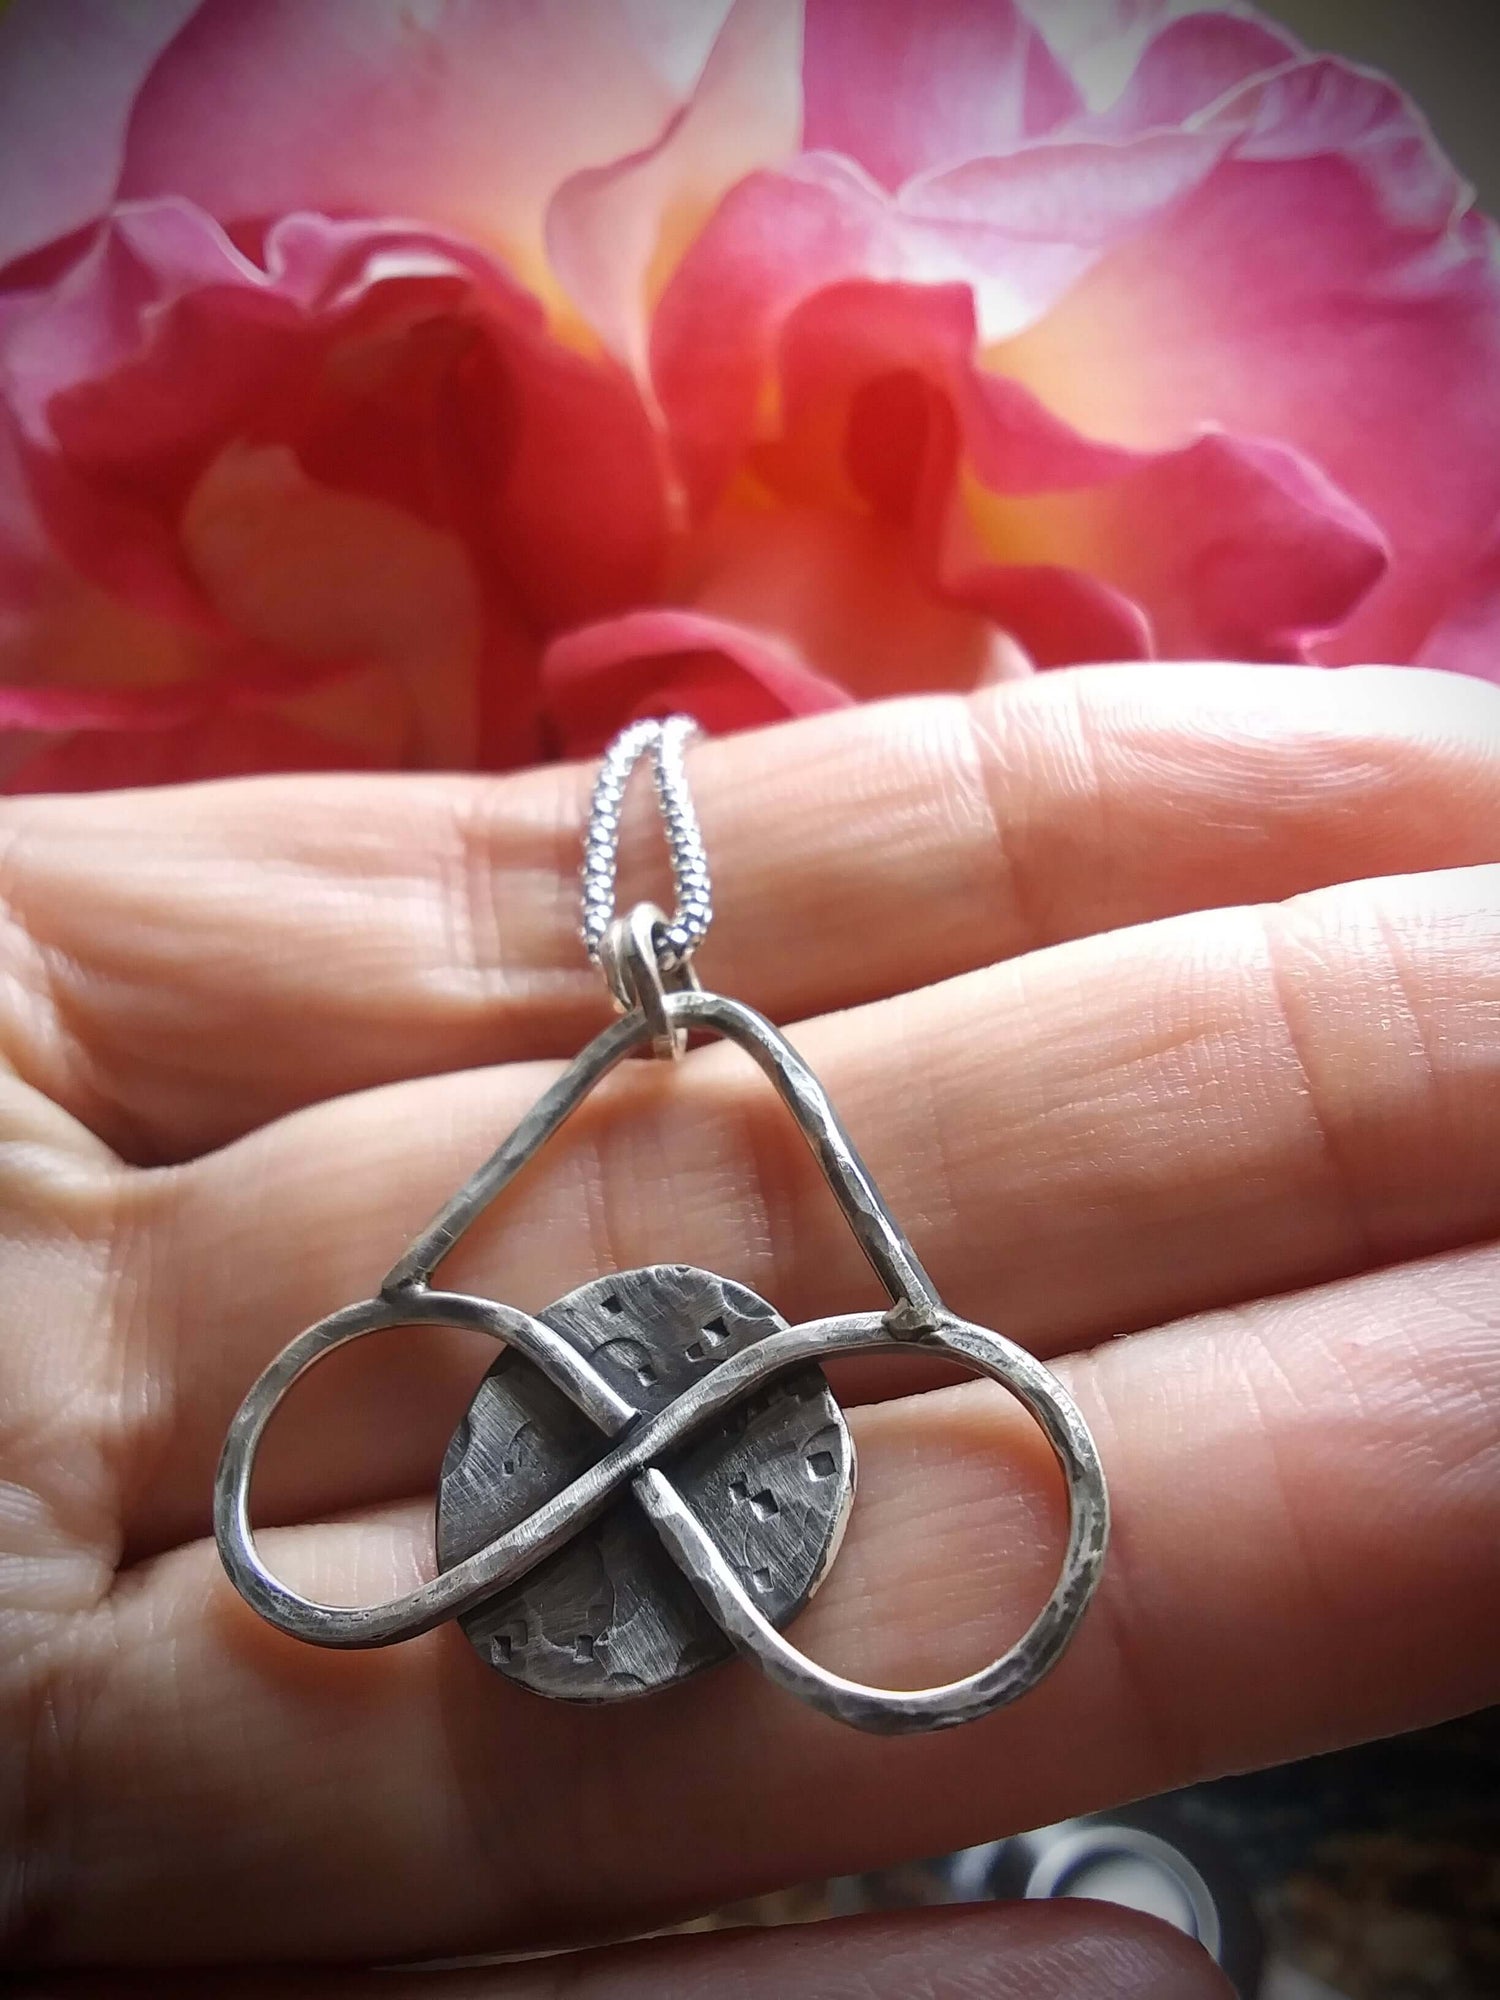 Silver pendant of a horizontal infinity sign overlaid n a textured full moon that is rested along the palm side of fingers in front of a large pink and yellowish rose.